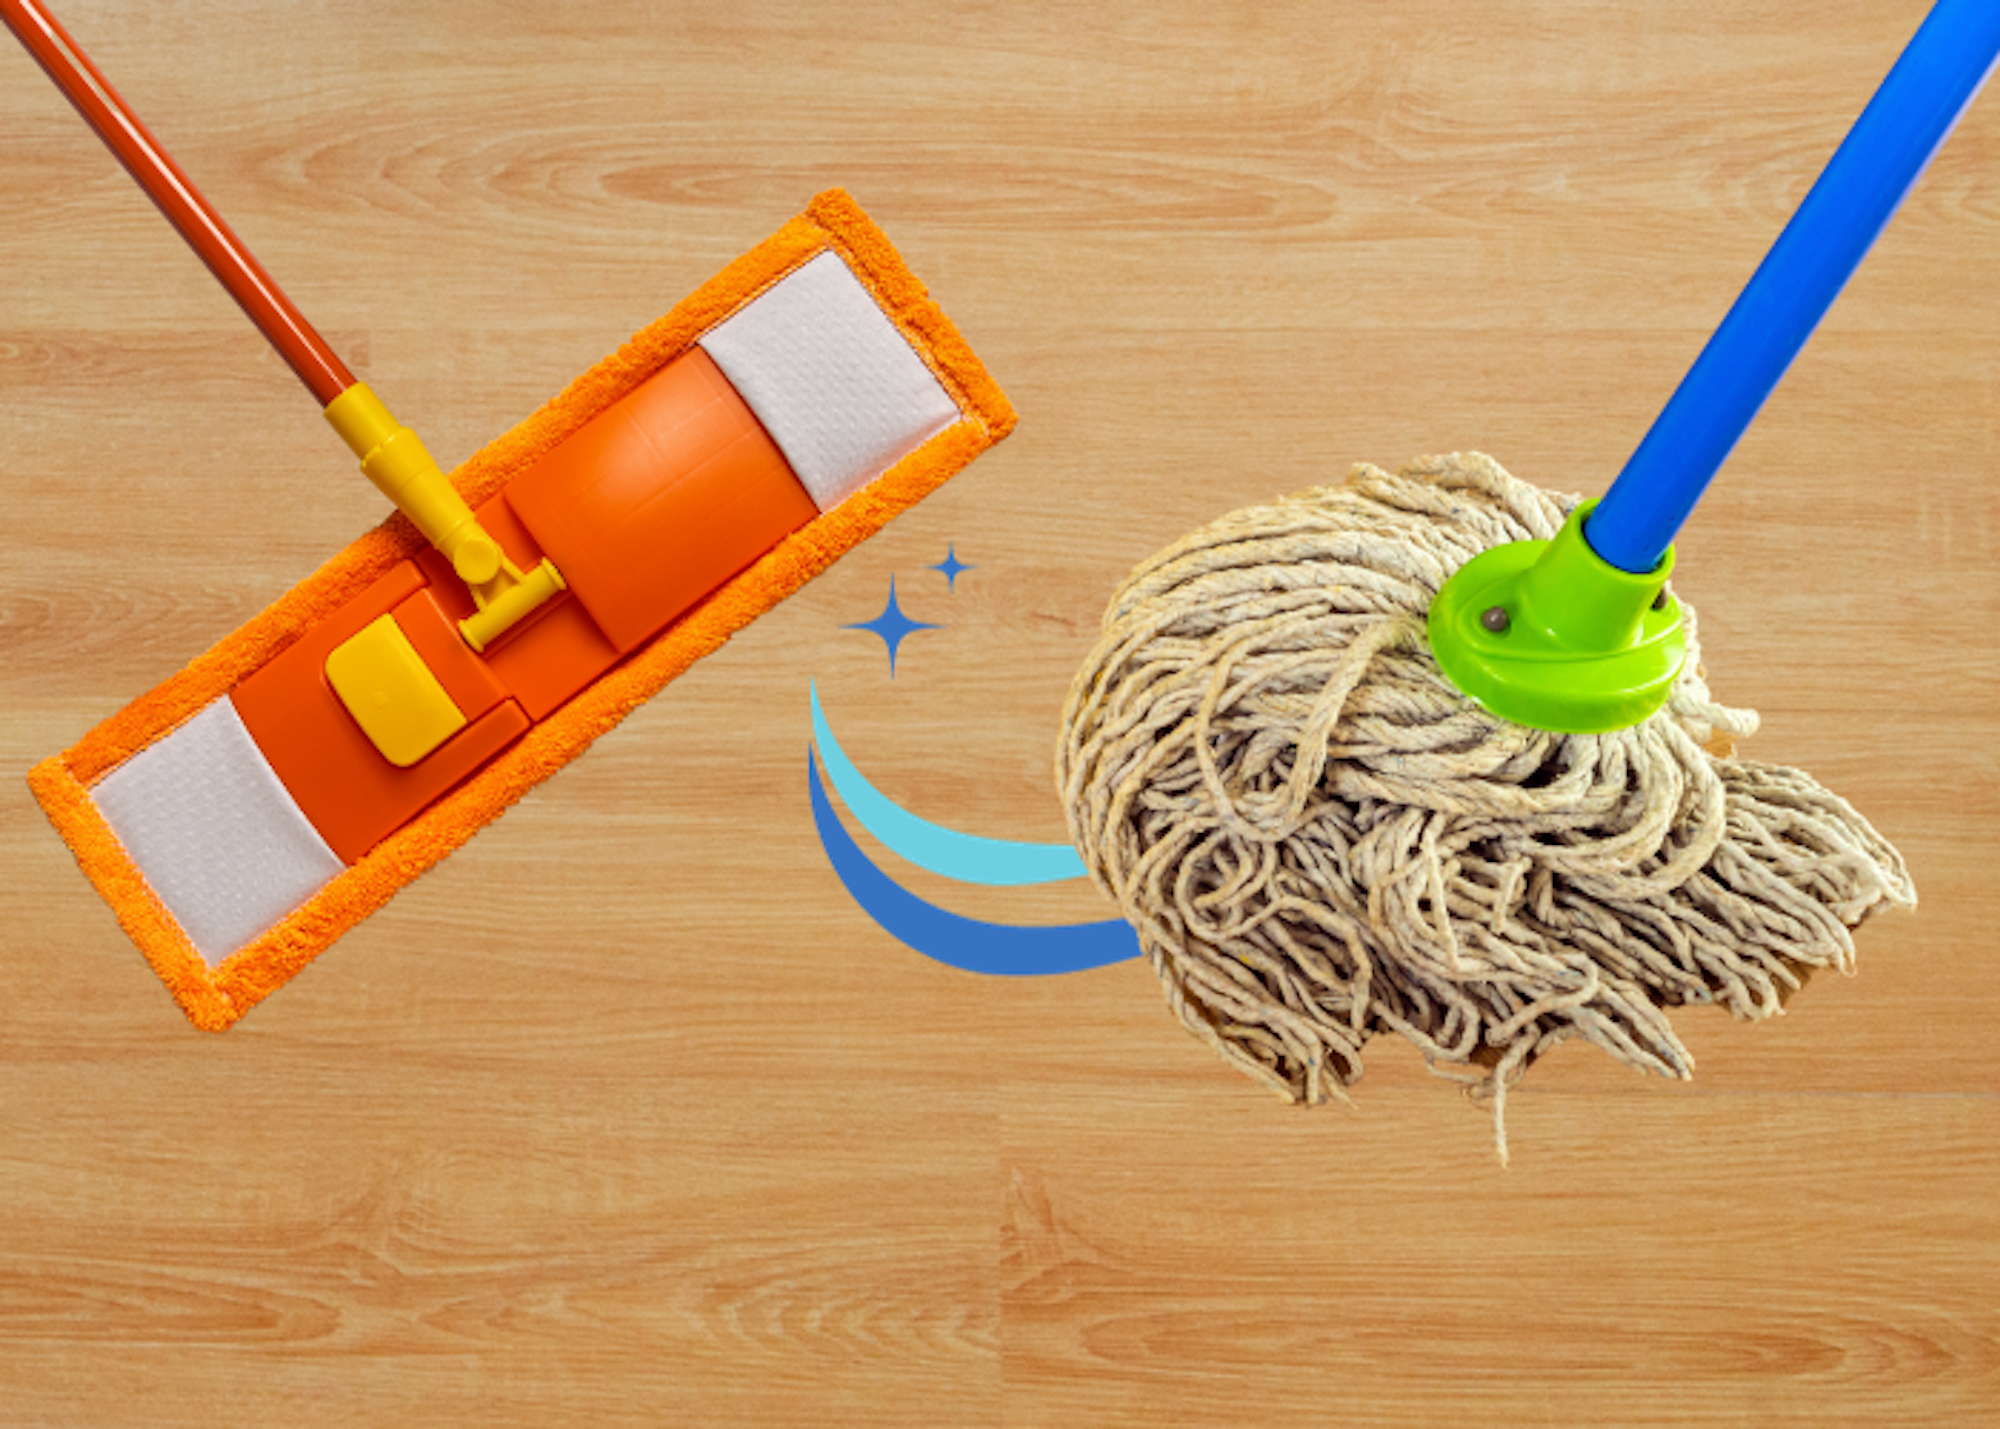 Find it difficult to mop because you've got to use a lot of effort? W